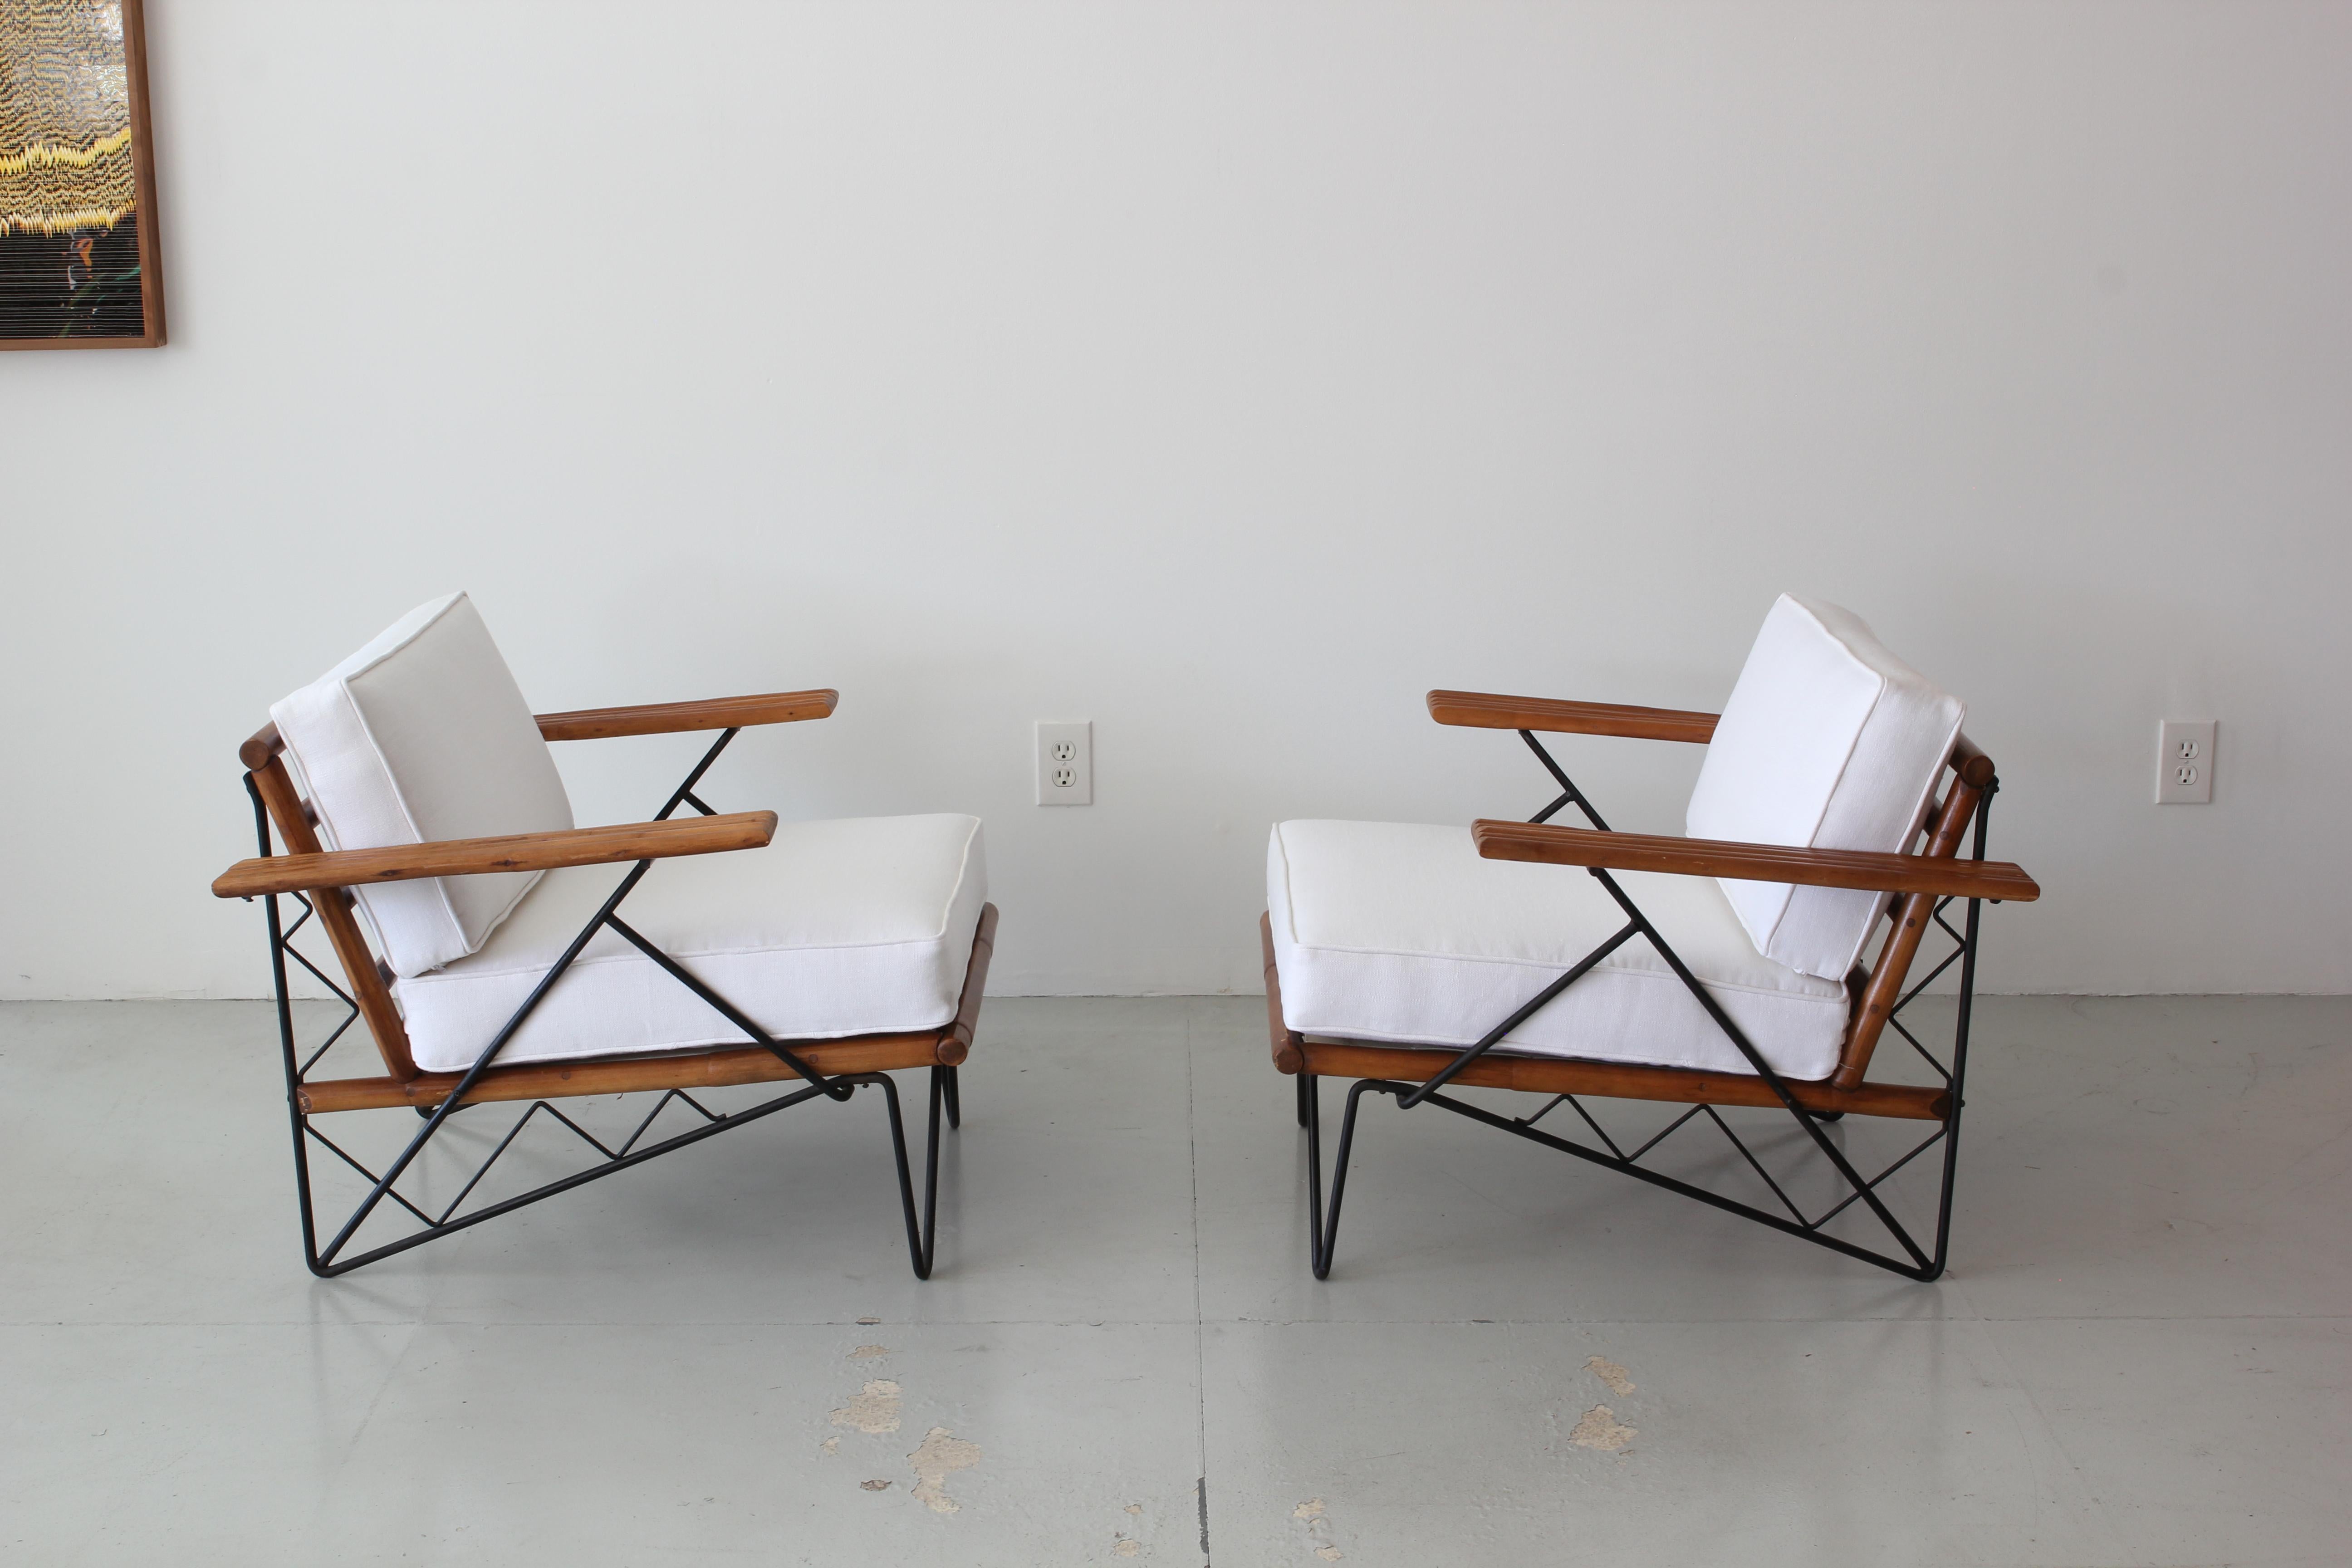 Pair of chairs from Ritts Furniture company, circa 1960s.
Interesting iron base
Rattan arms and slatted back
Newly uphostered in white linen.